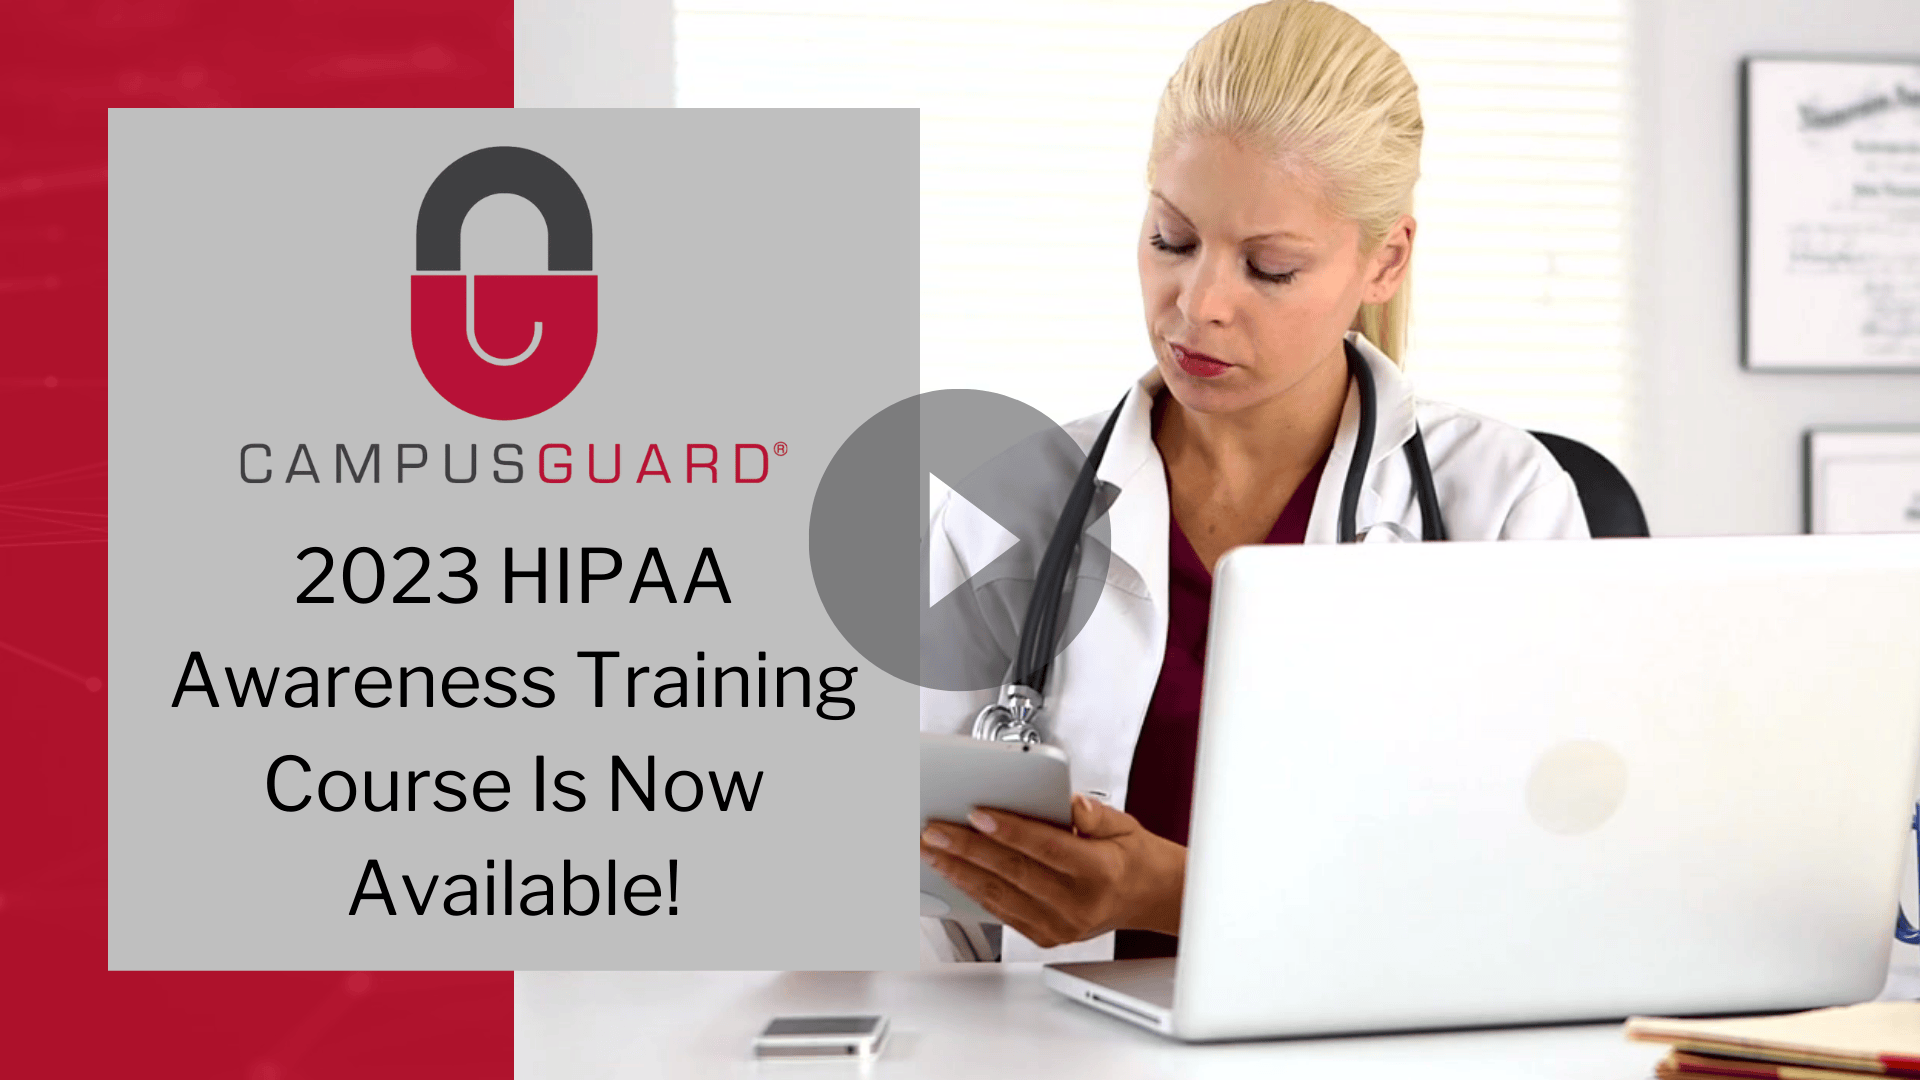 2023 HIPAA Awareness Training Course Is Now Available!